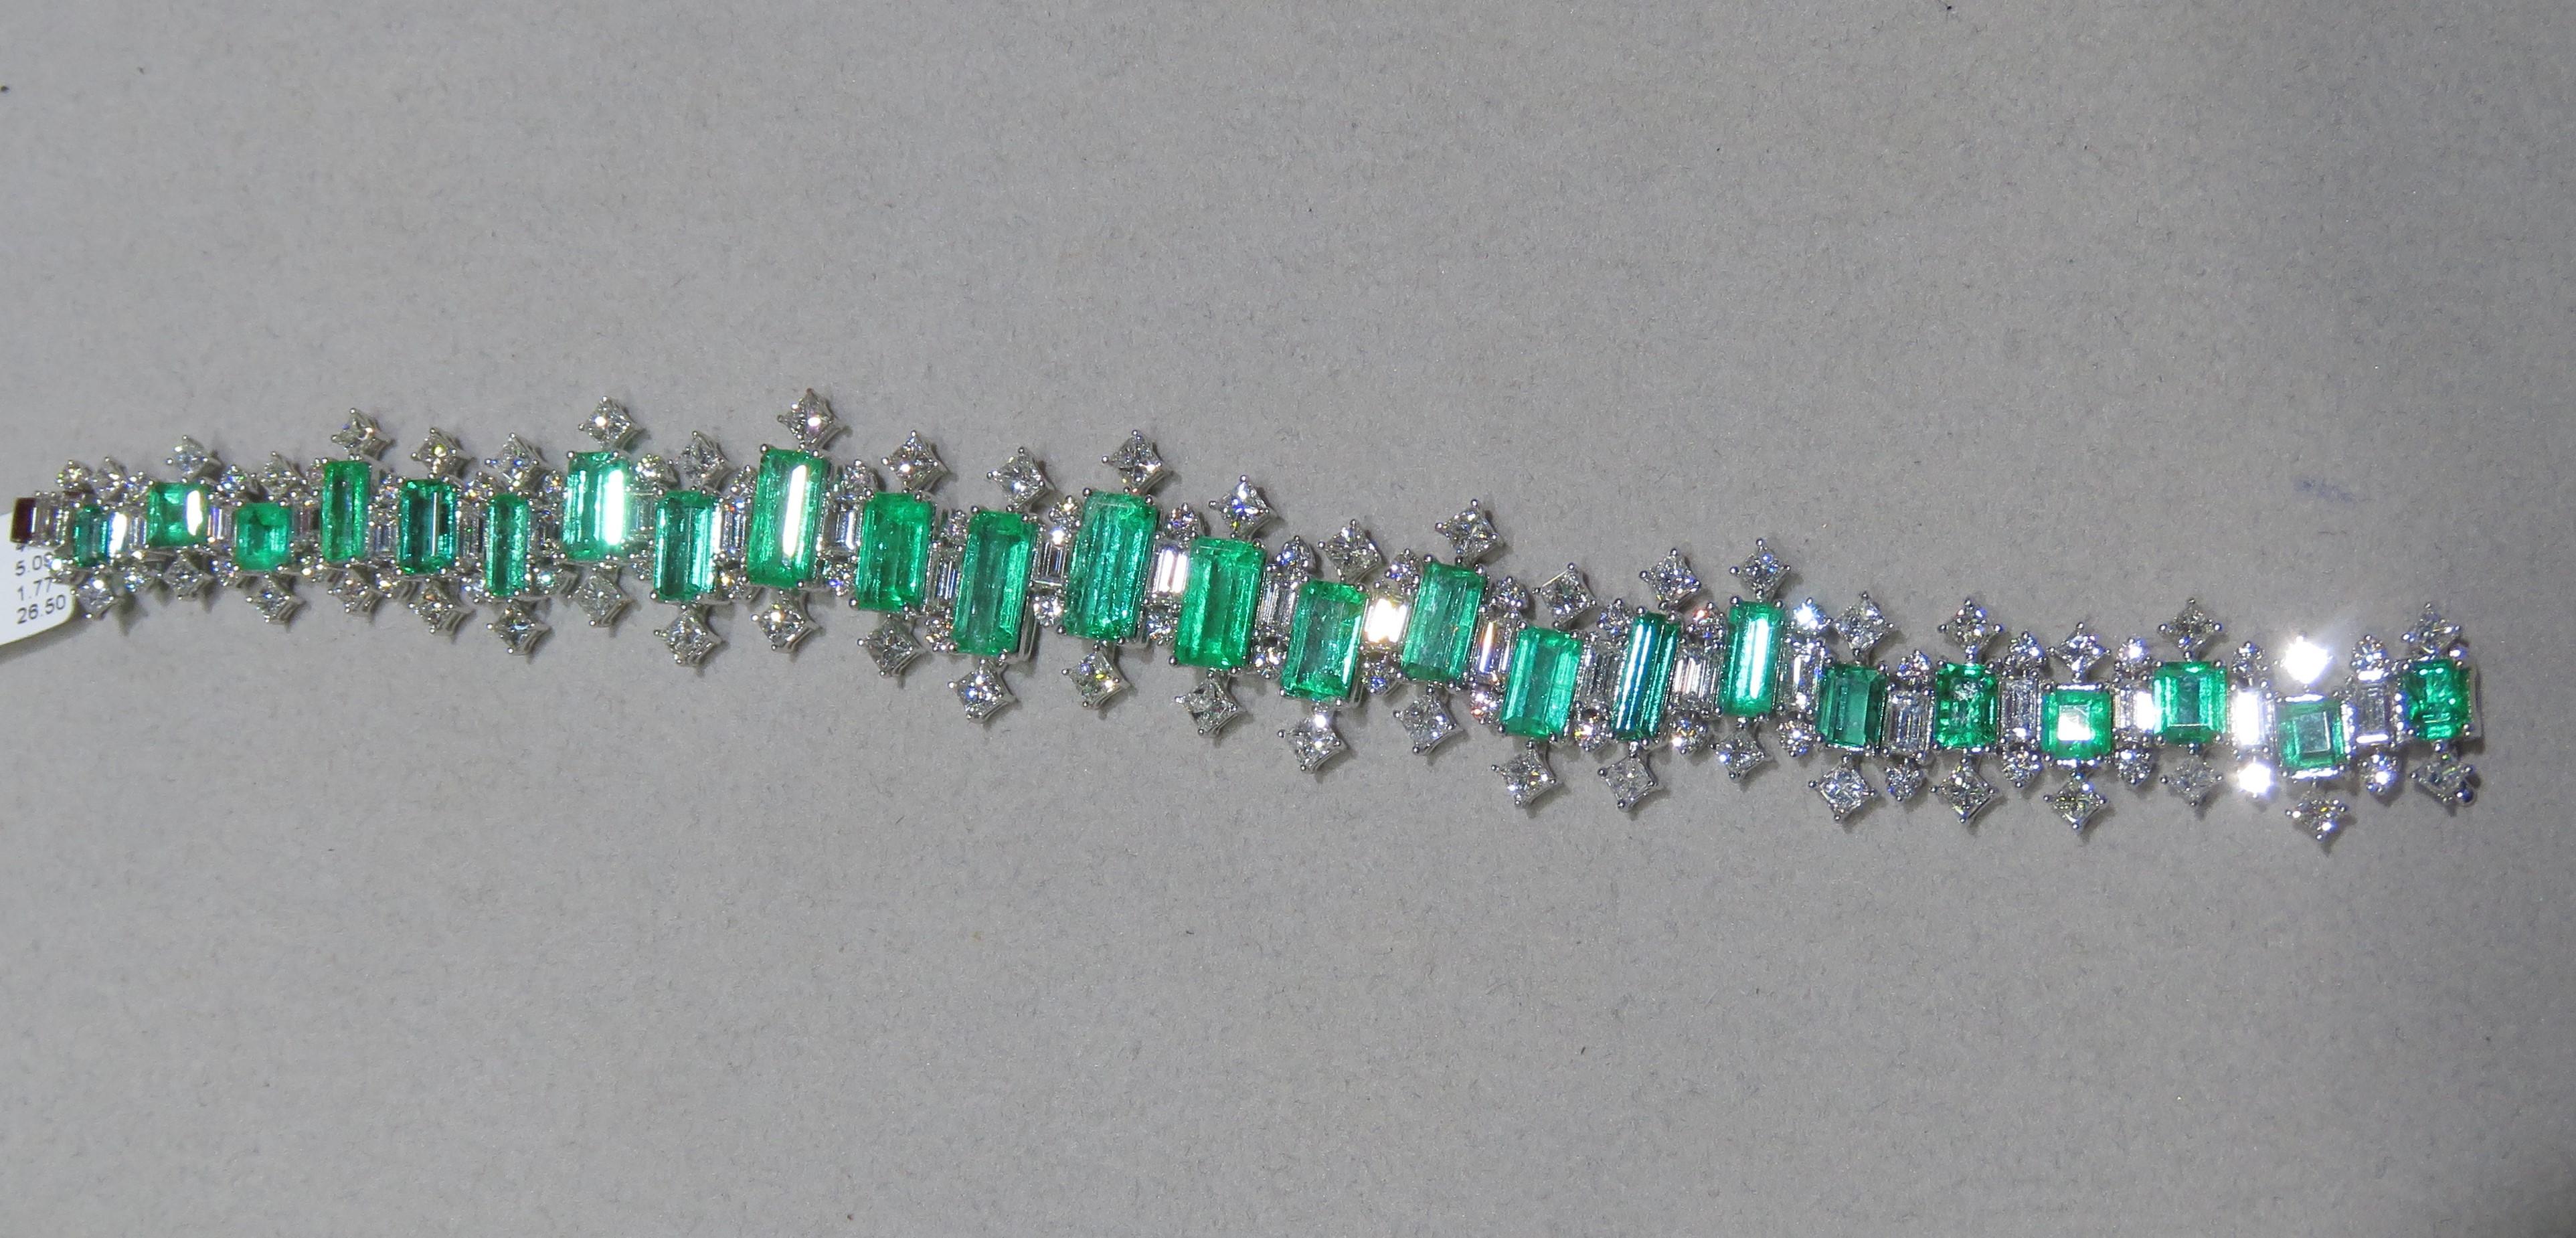 The Following Item we are offering is this Important Radiant 18KT Gold Gorgeous Glittering and Sparkling Magnificent Fancy Cut Rare Colombian Emerald and Diamond Bracelet. Necklace contains approx 30CTS of Beautiful Fancy Emeralds and Diamonds!!!